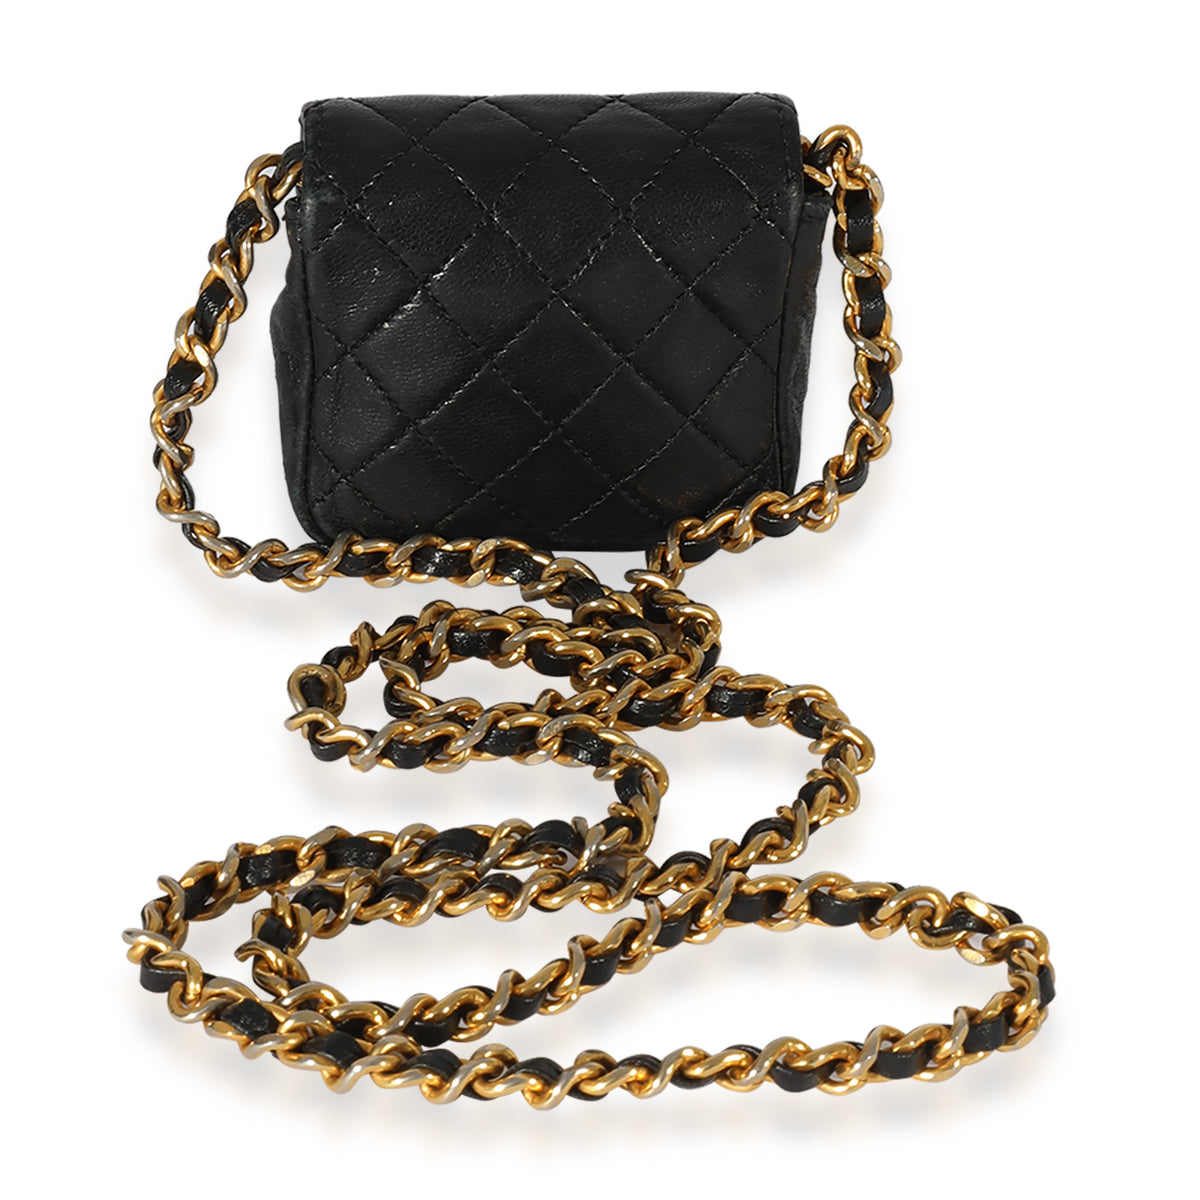 CHANEL, Bags, Chanel Vintage Navy Half Moon Quilted Flap Bag